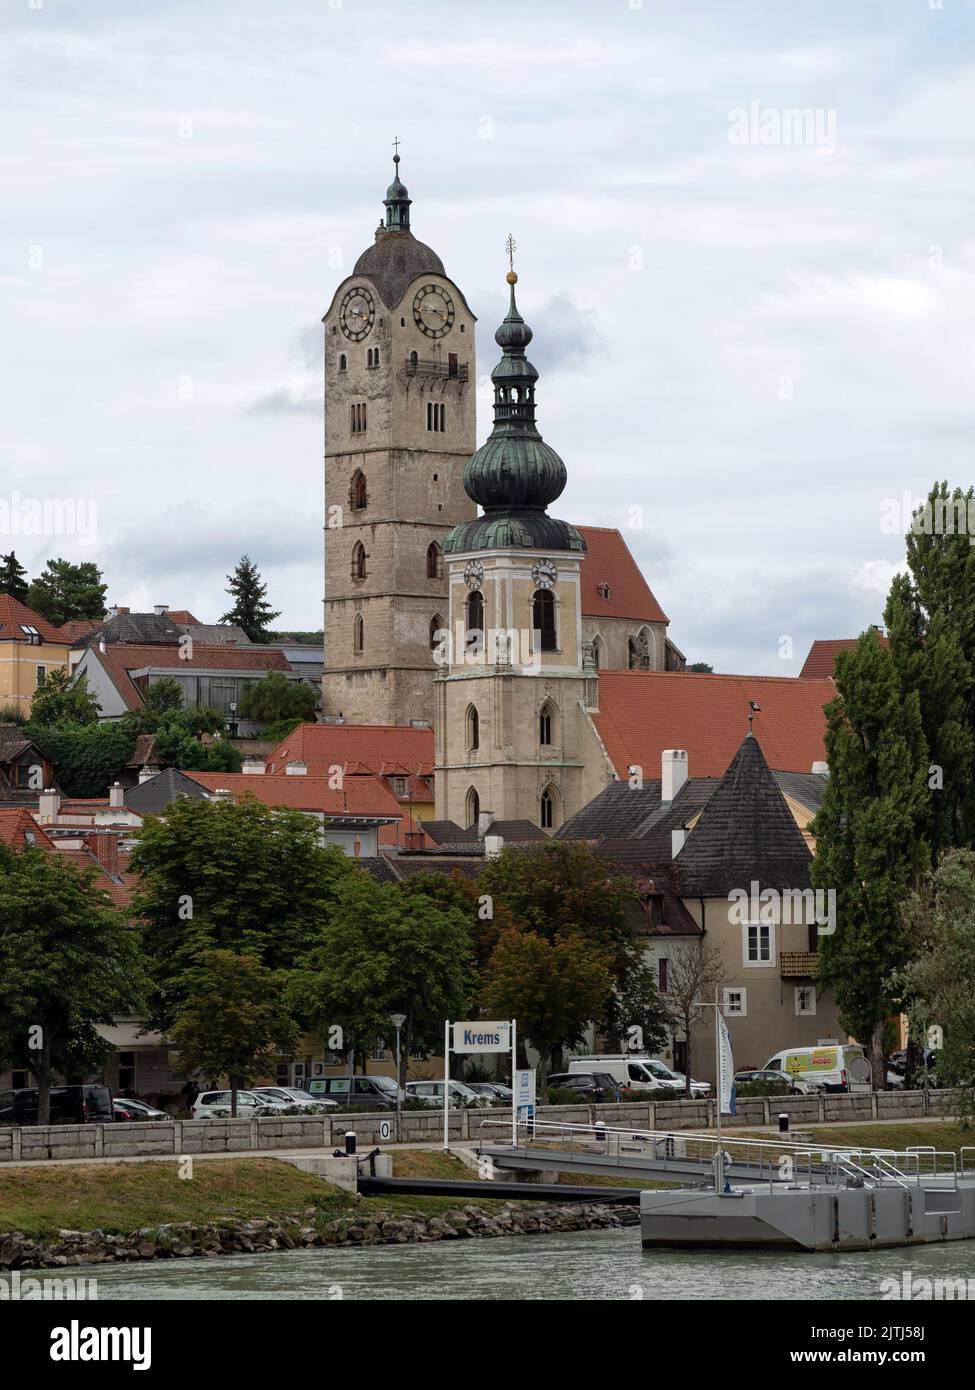 KREMS, AUSTRIA - JULY 13, 2019:  View of the town and church towers in the Old Town as seen from the Danube River Stock Photo